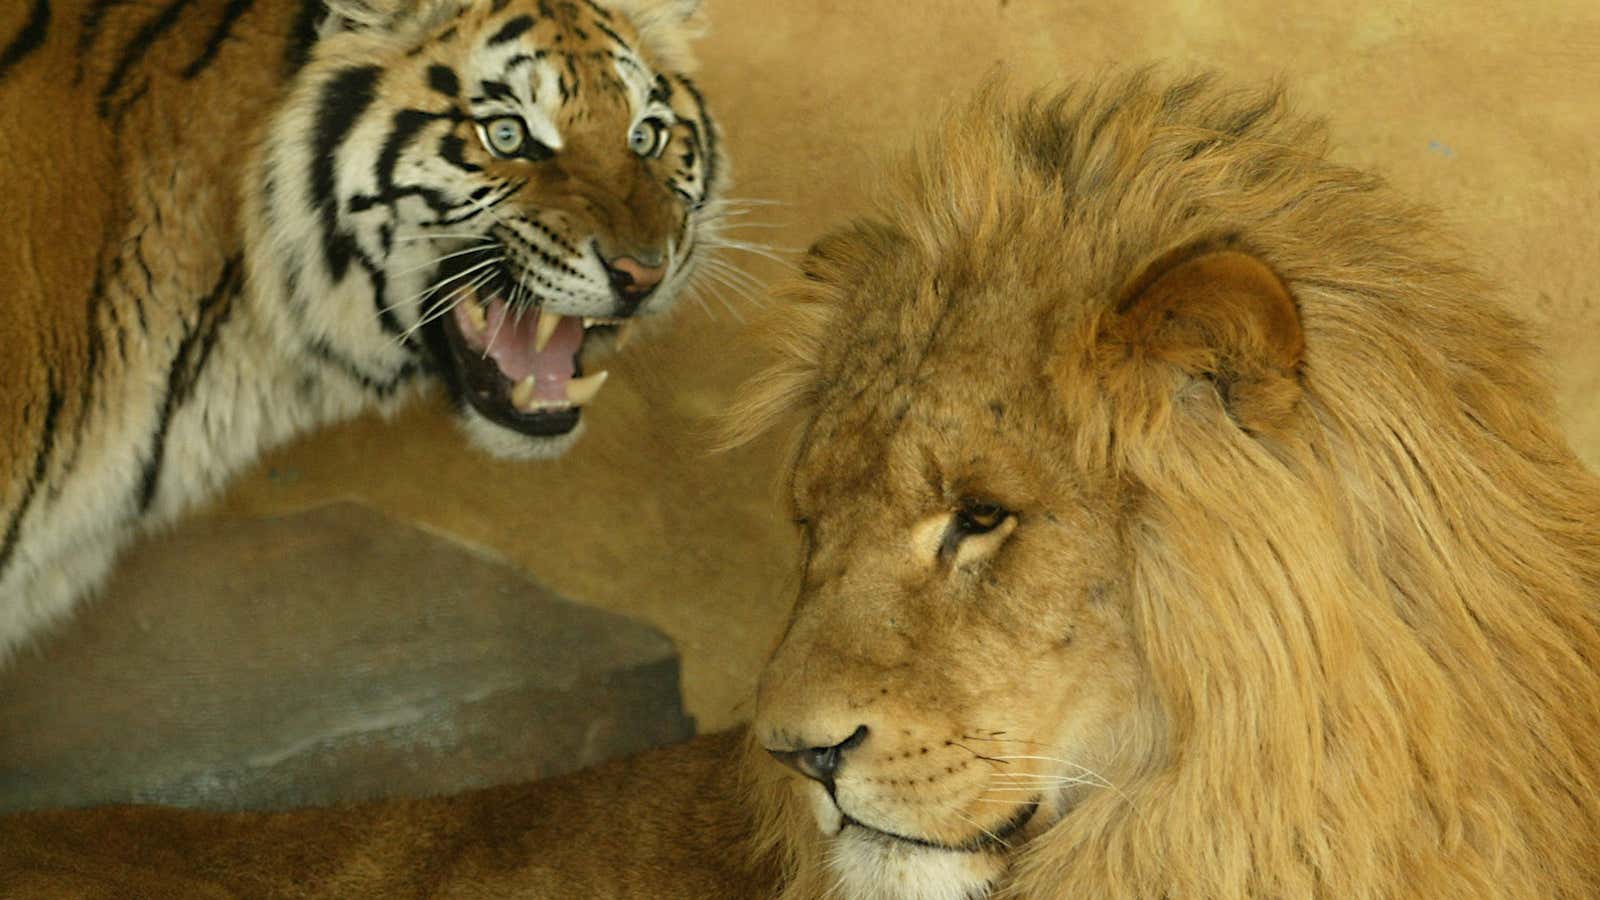 Female tiger Dima (L) roars at Male lion Kaser at Jordan’s Zoo near Amman April 13, 2004. The Amman Zoo director said on Tuesday that…